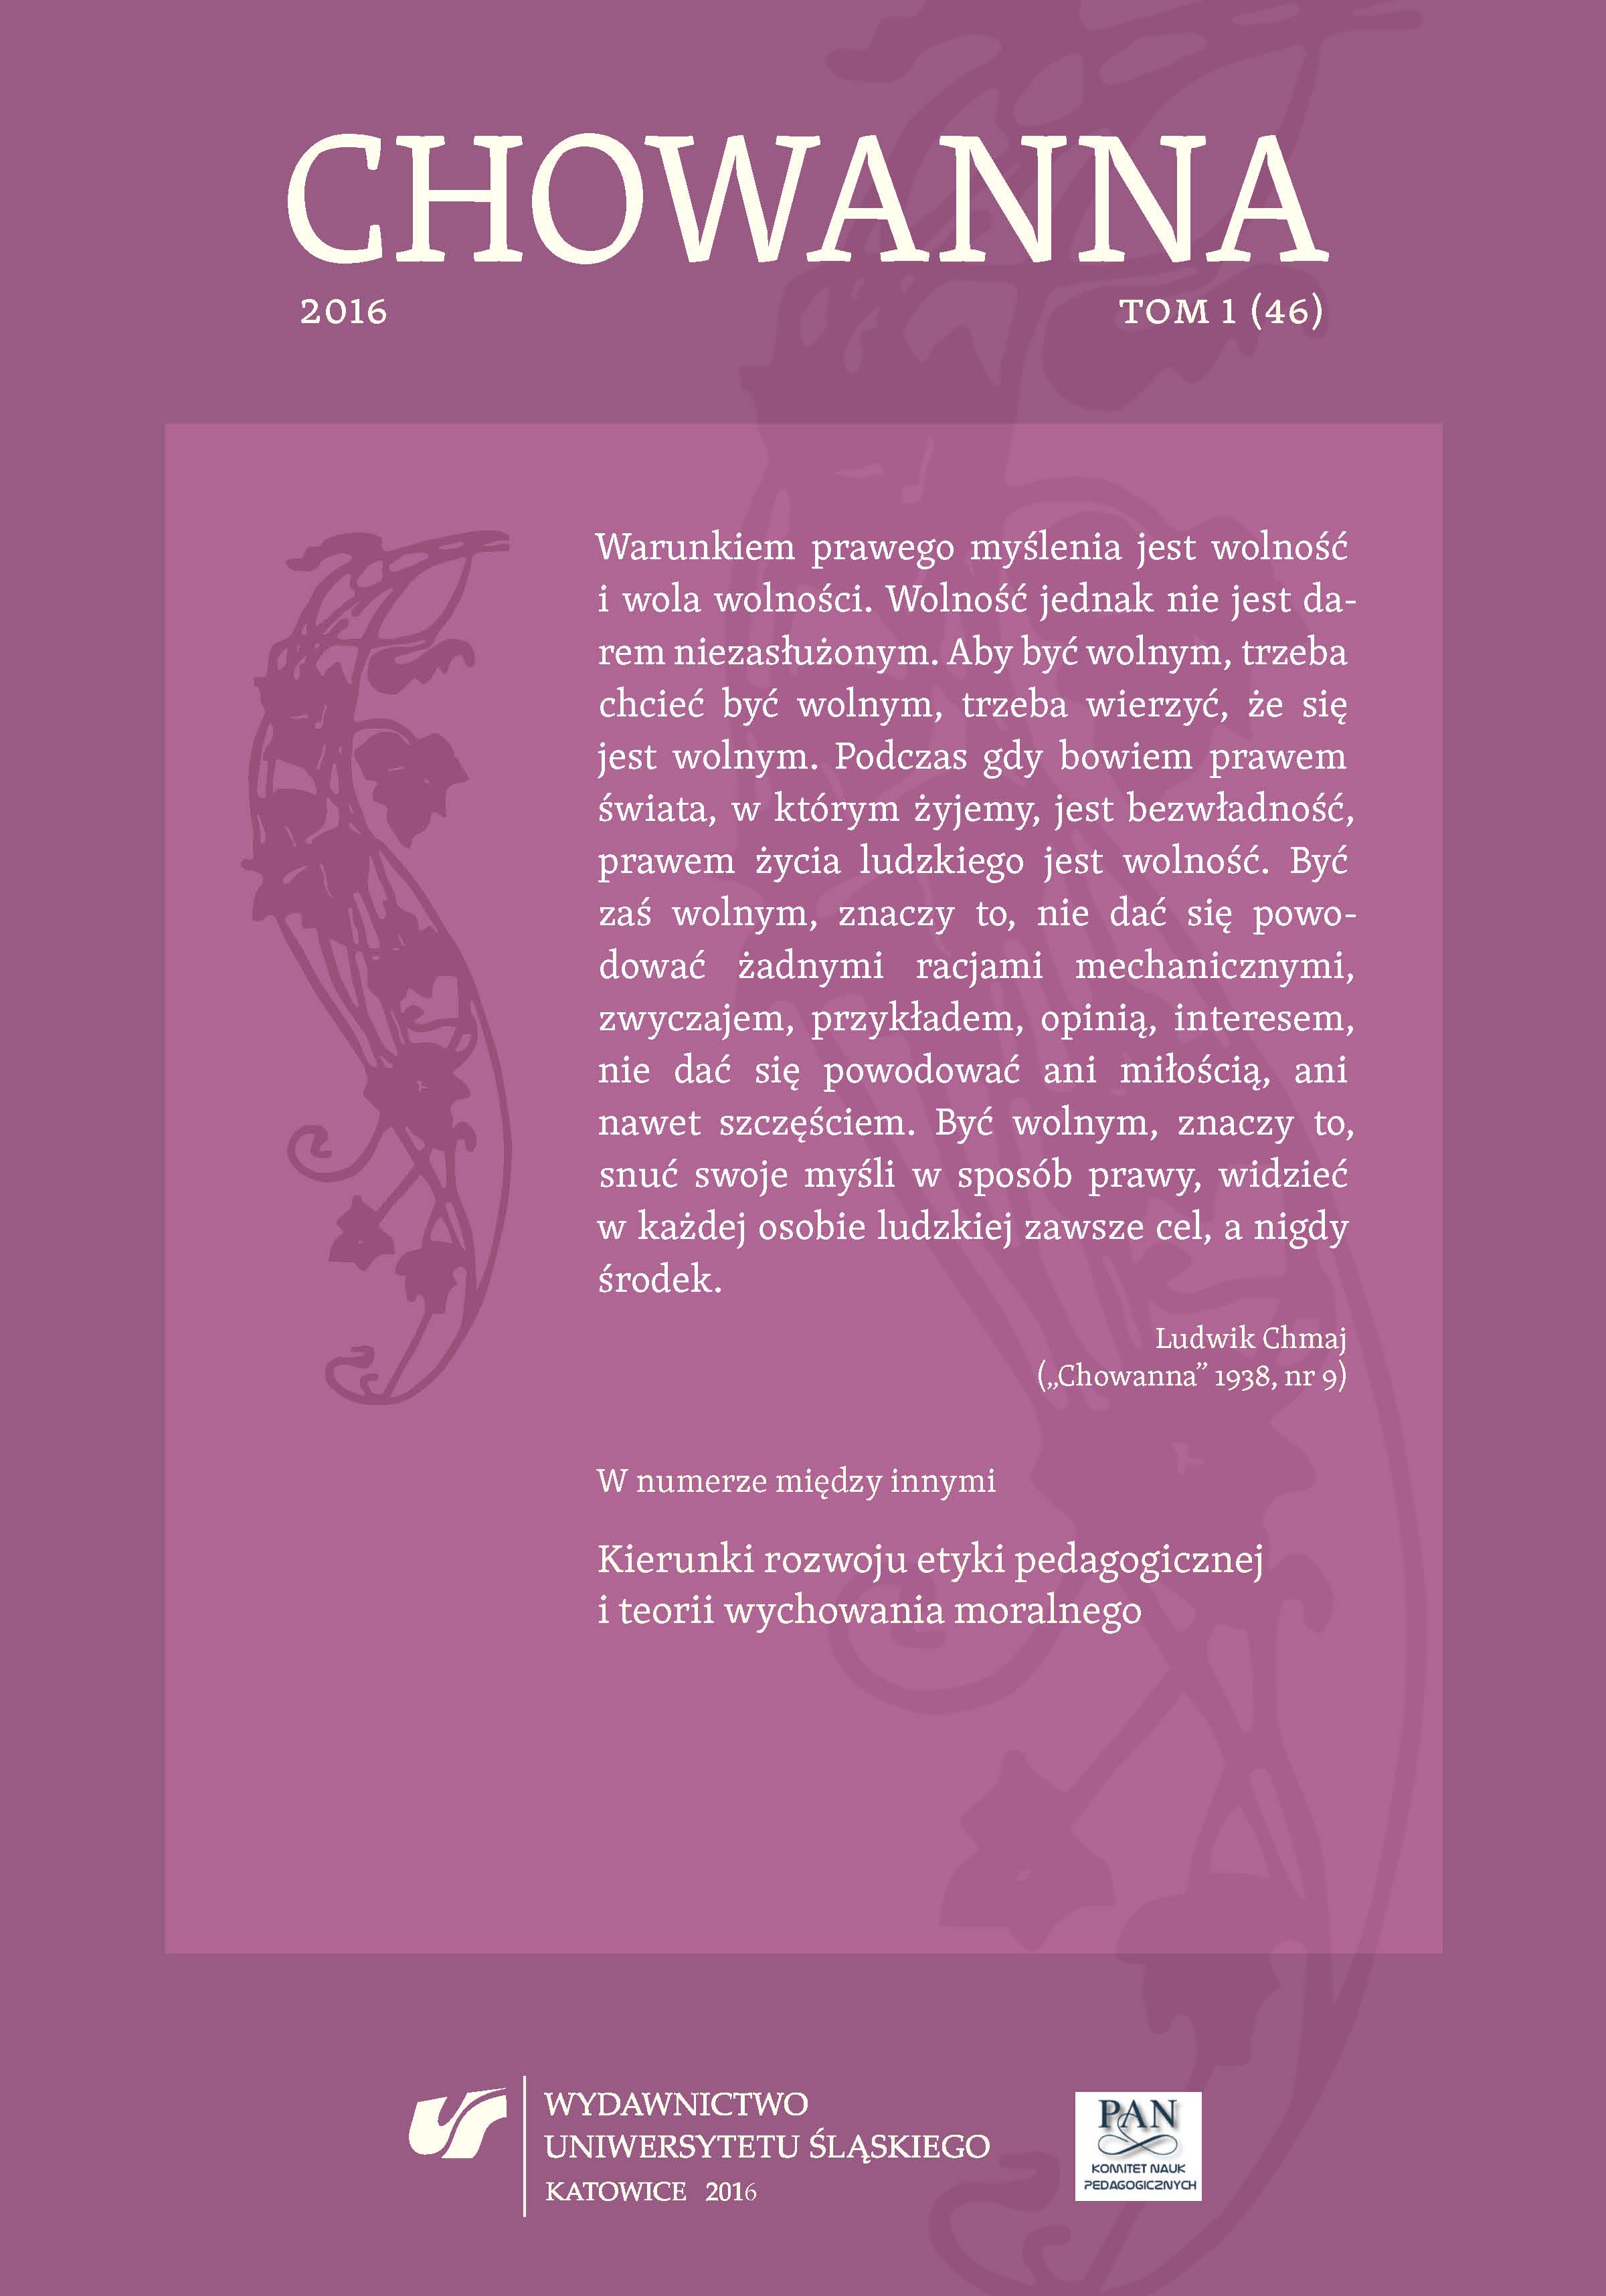 Monographic Part. Developmental Directions of Pedagogical Ethic and Theory of Moral Education (edited by Alicja Żywczok): Preferences Axiological Education Students Cover Image